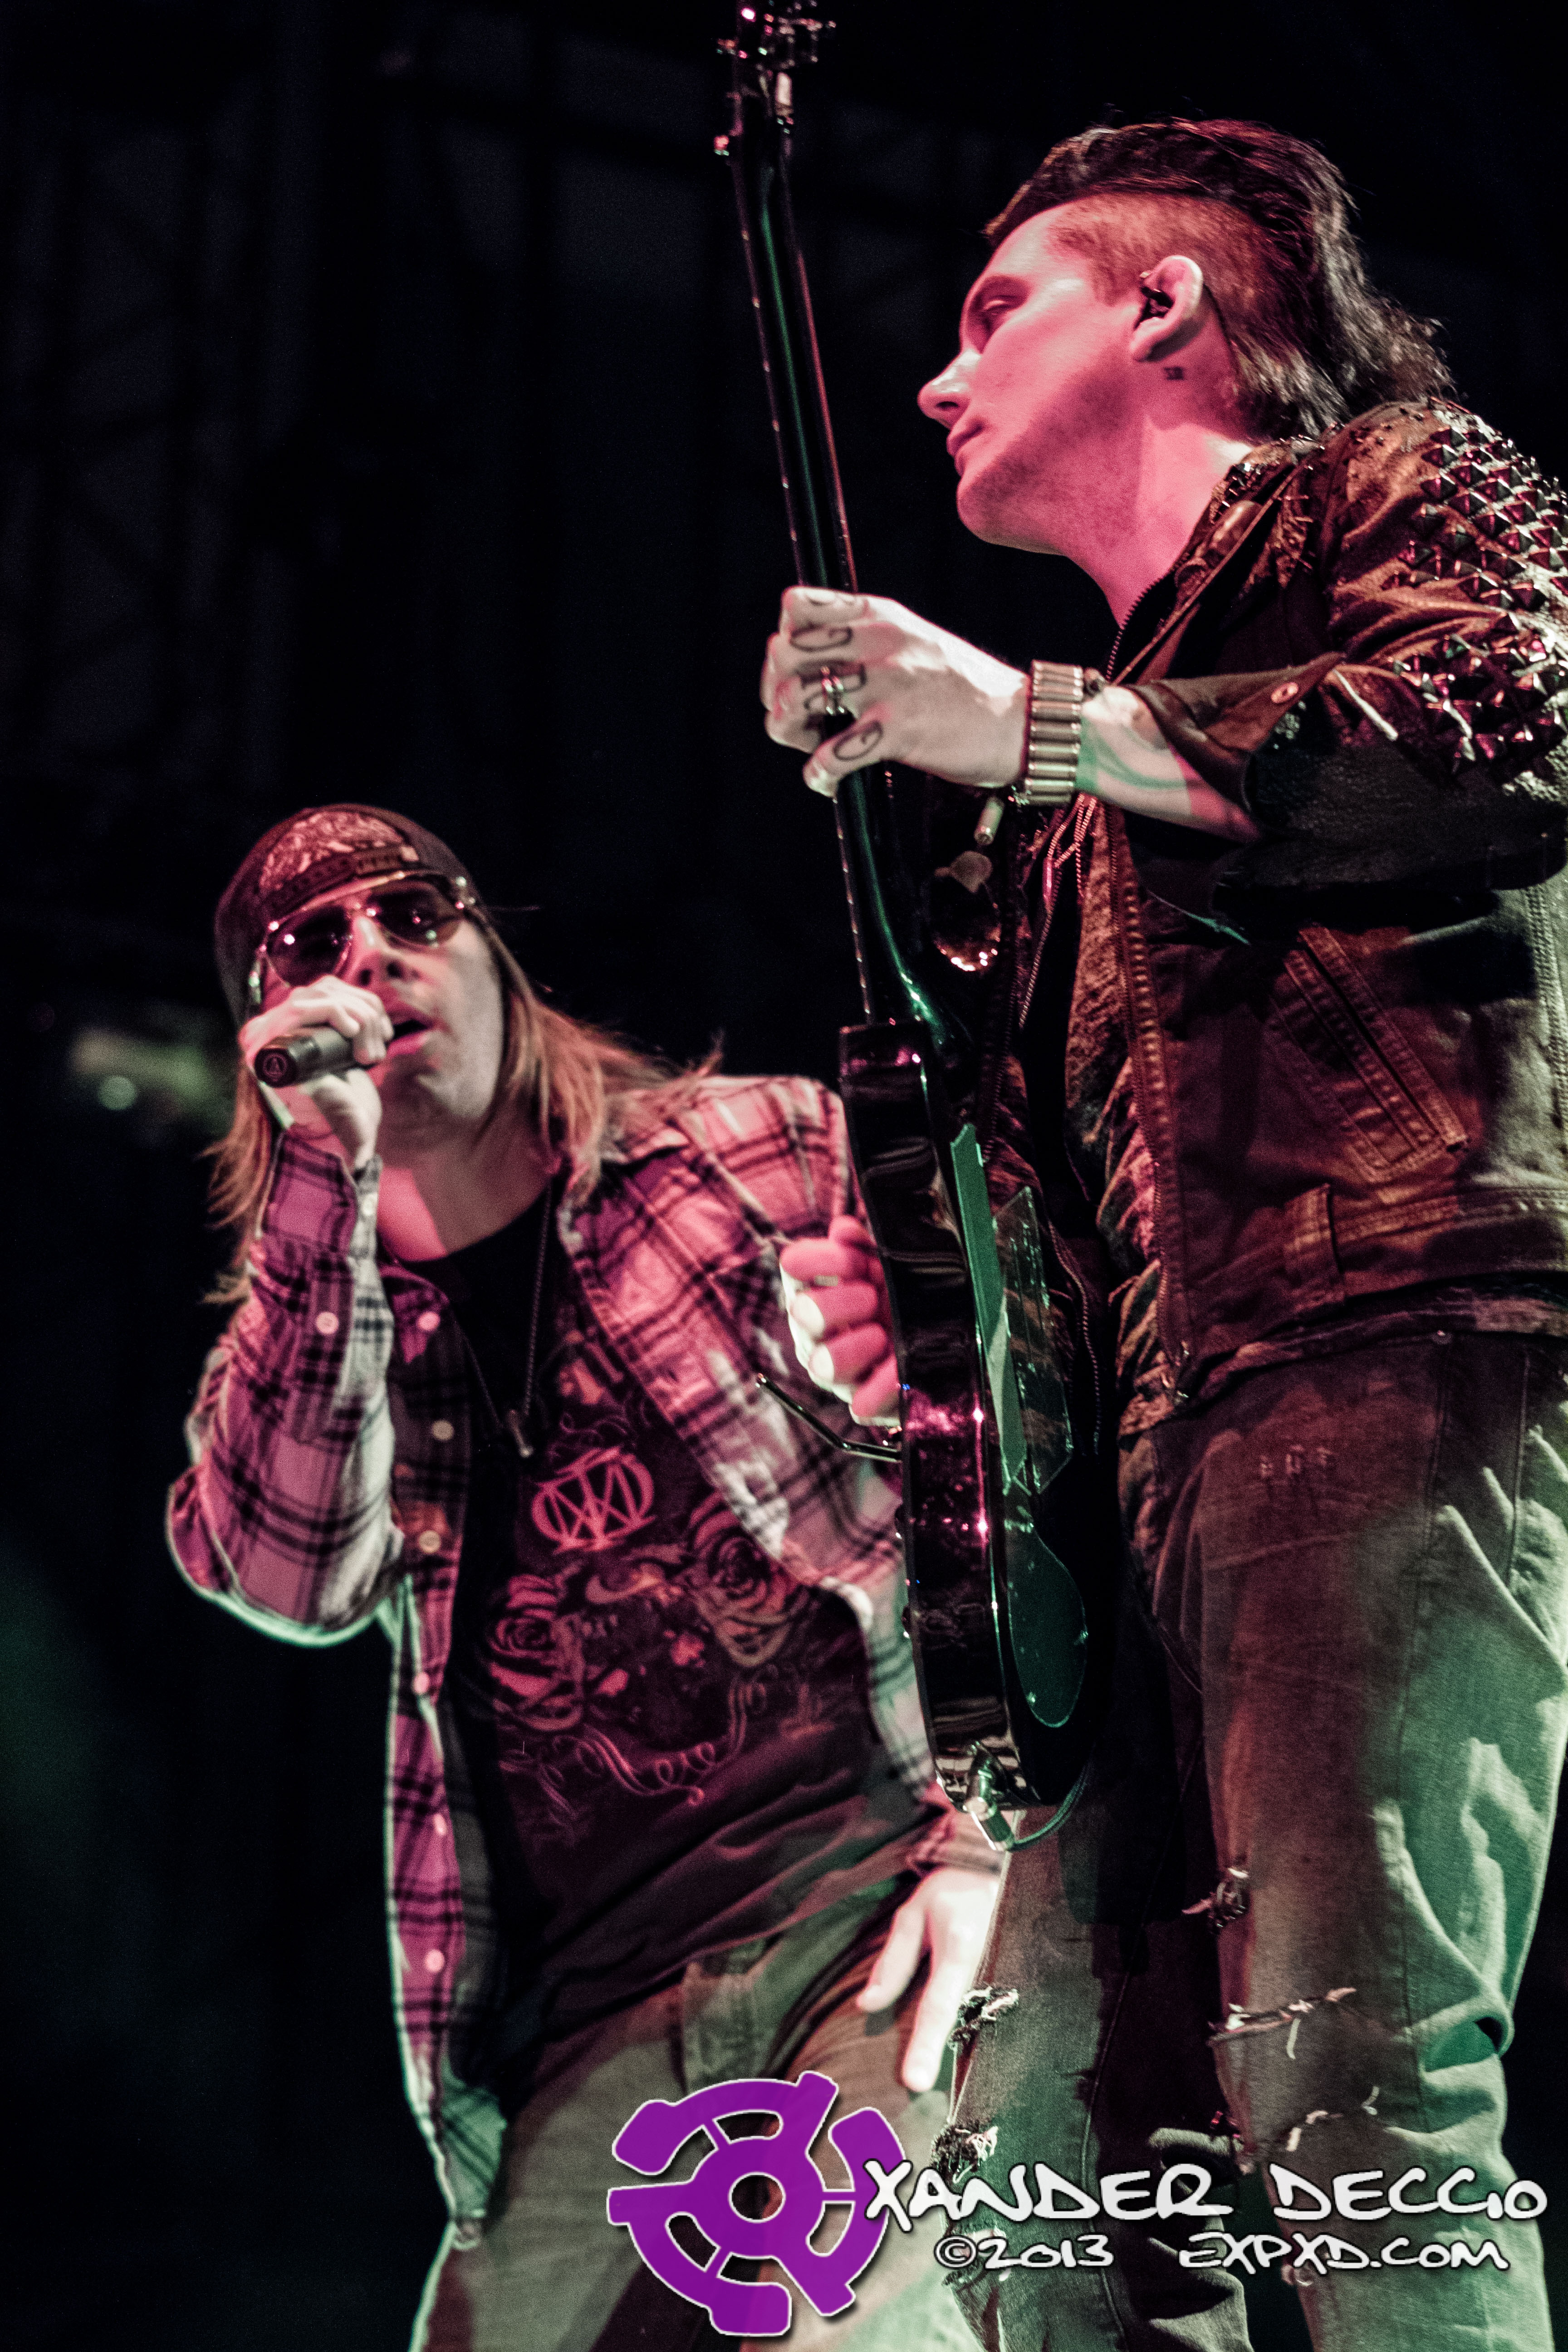 Pain In The Grass 2013: Avenged Sevenfold (Photo by Xander Deccio)